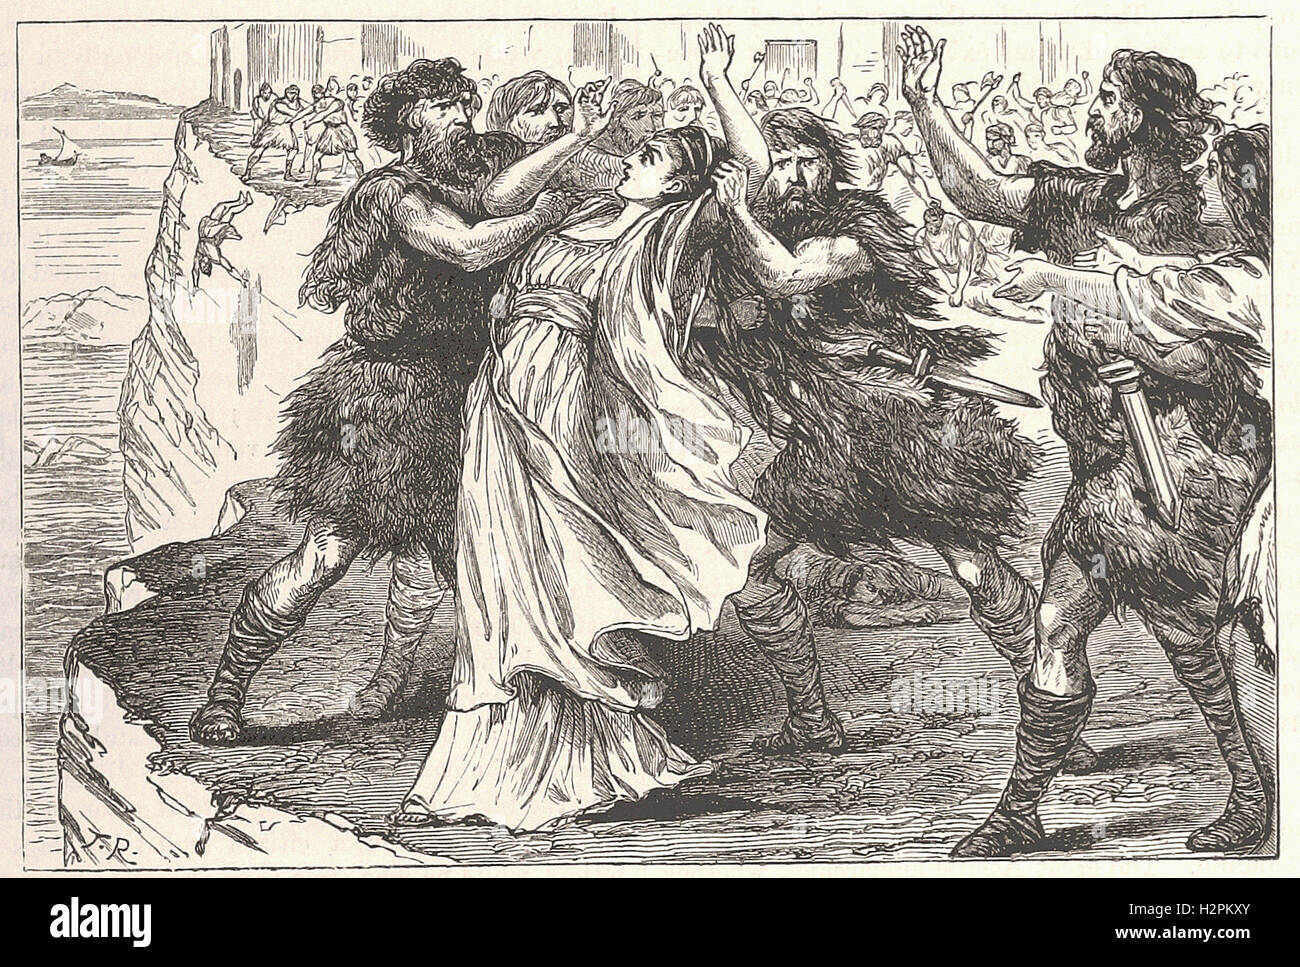 THE REVOLTED SLAVES AT ENNA. - from 'Cassell's Illustrated Universal History' - 1882 Stock Photo